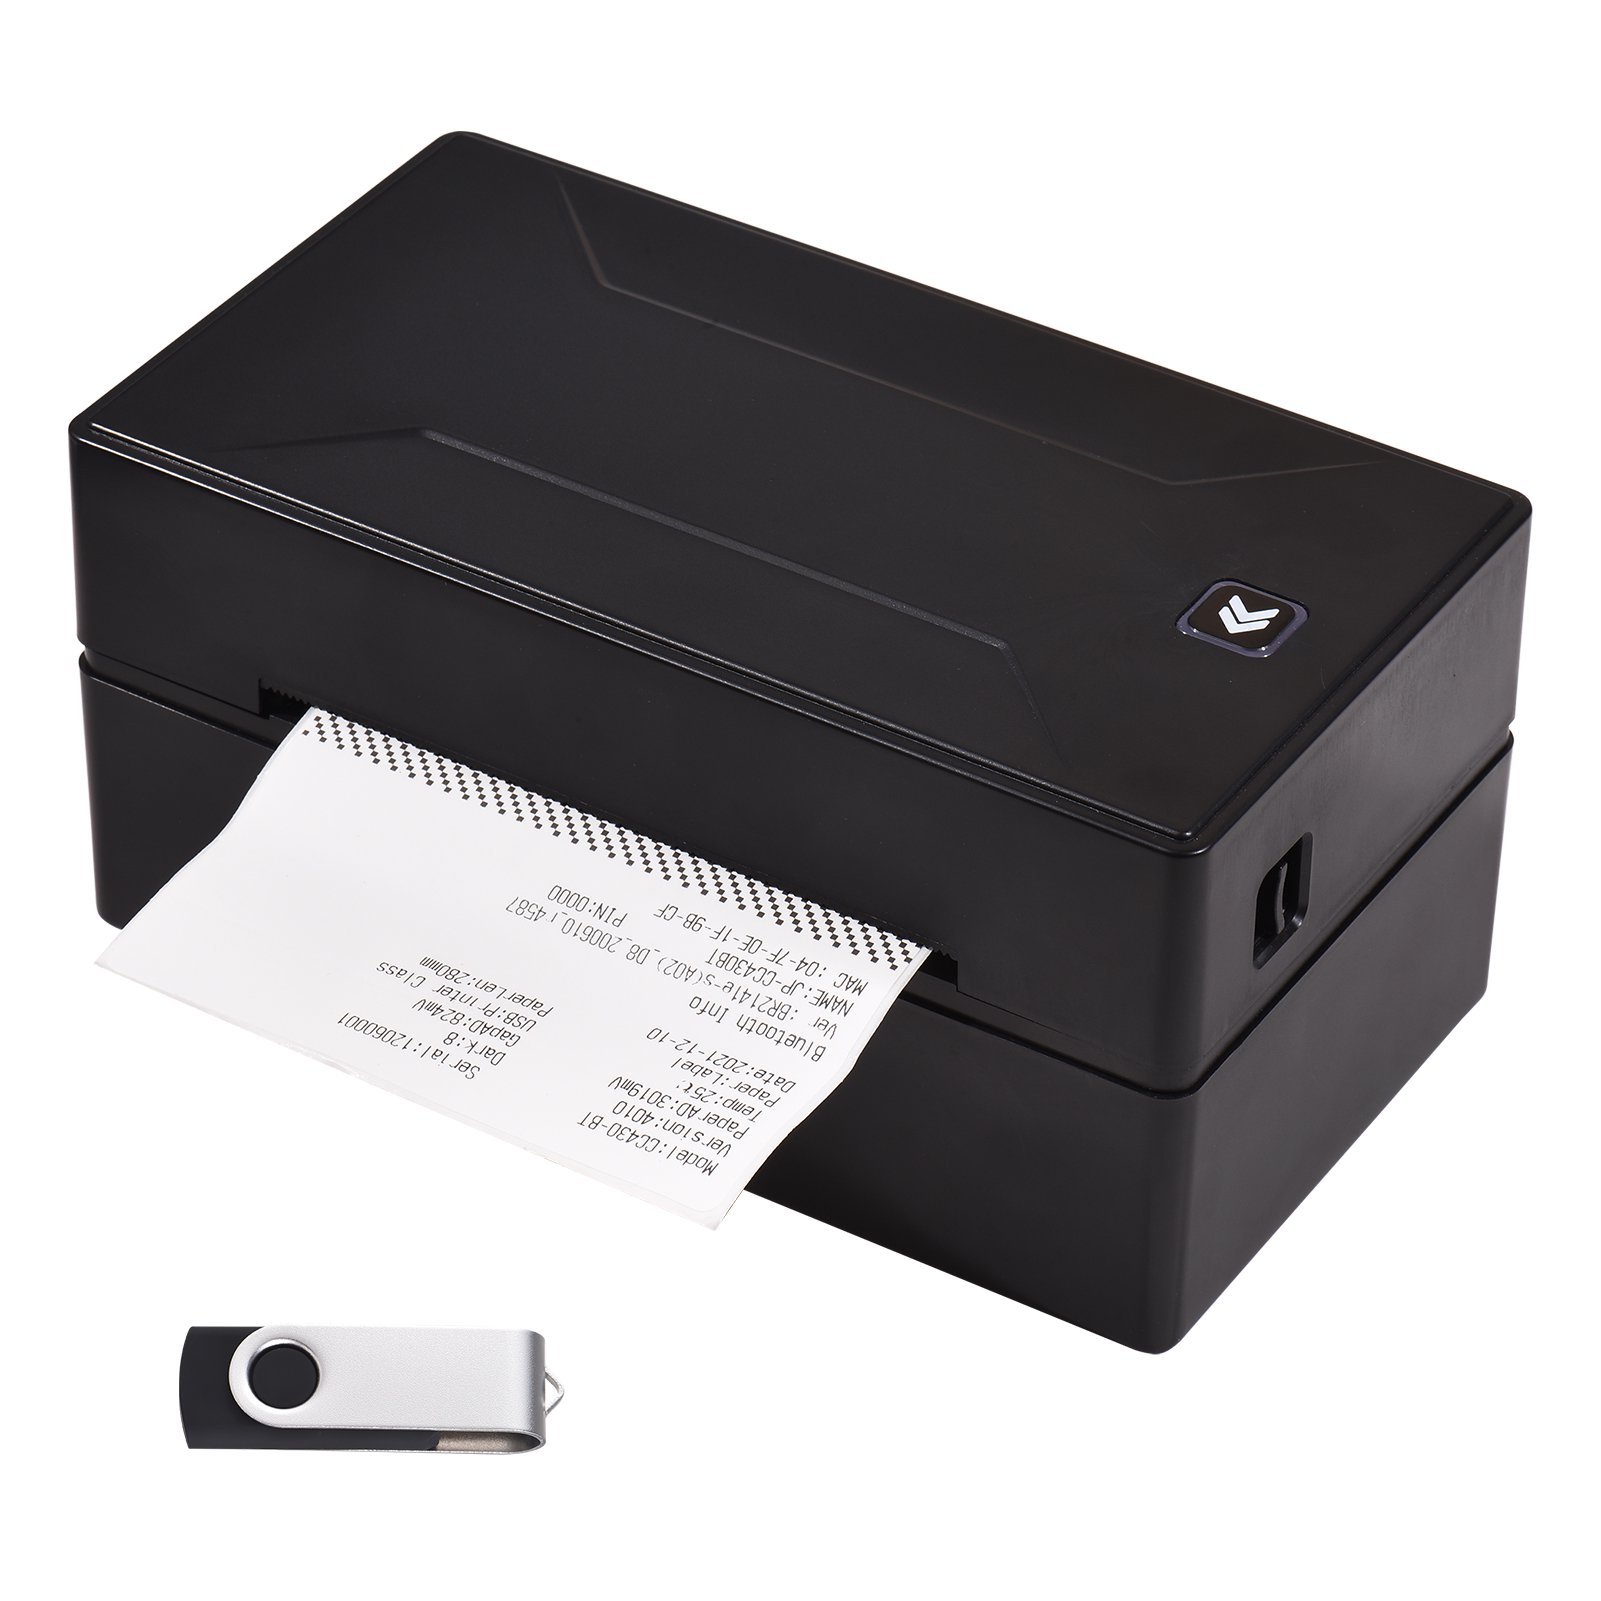 Desktop Thermal Label Printer for 4x6 Shipping Package Label Printing All in One Label Maker Wireless BT&USB Connection 180mm/s High Speed Thermal Sticker Printer Max.110mm Paper Width Compa